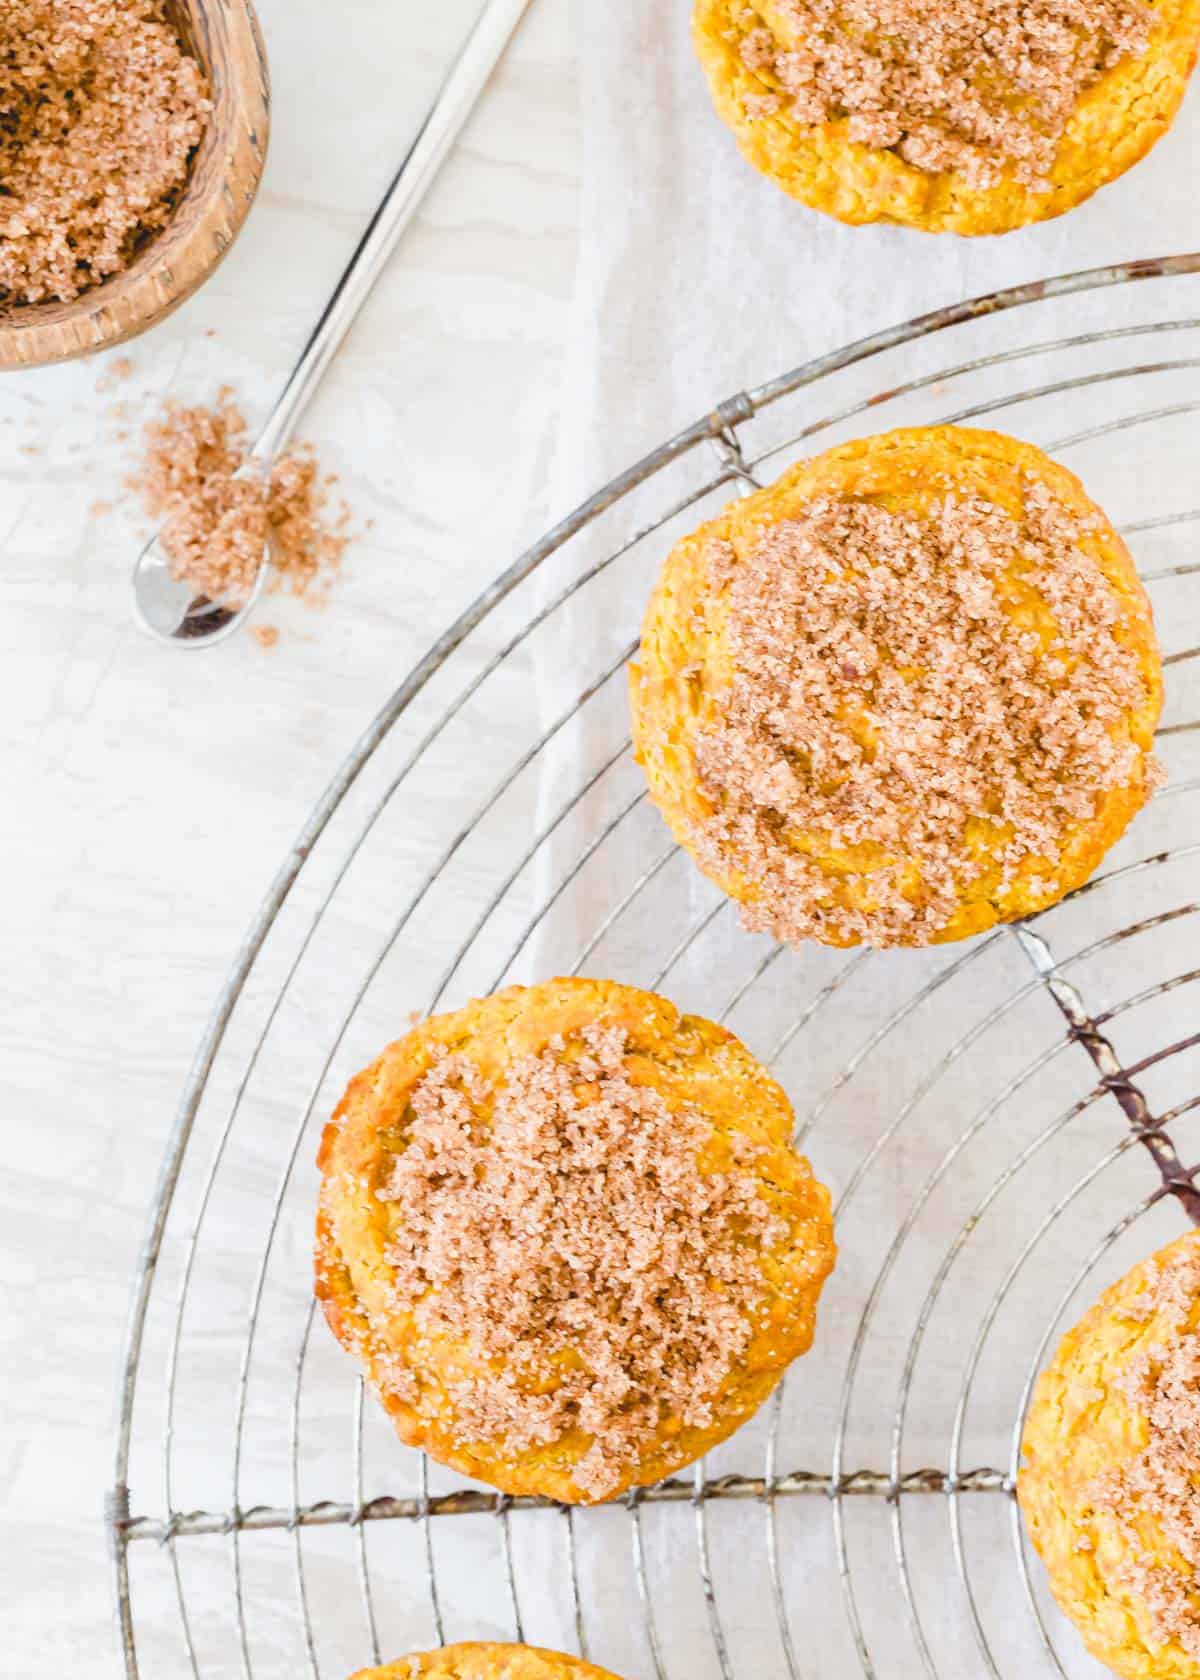 simple pantry ingredient gluten-free pumpkin muffins are moist, tender and full of warming fall spices like cinnamon, nutmeg, ginger and cloves.